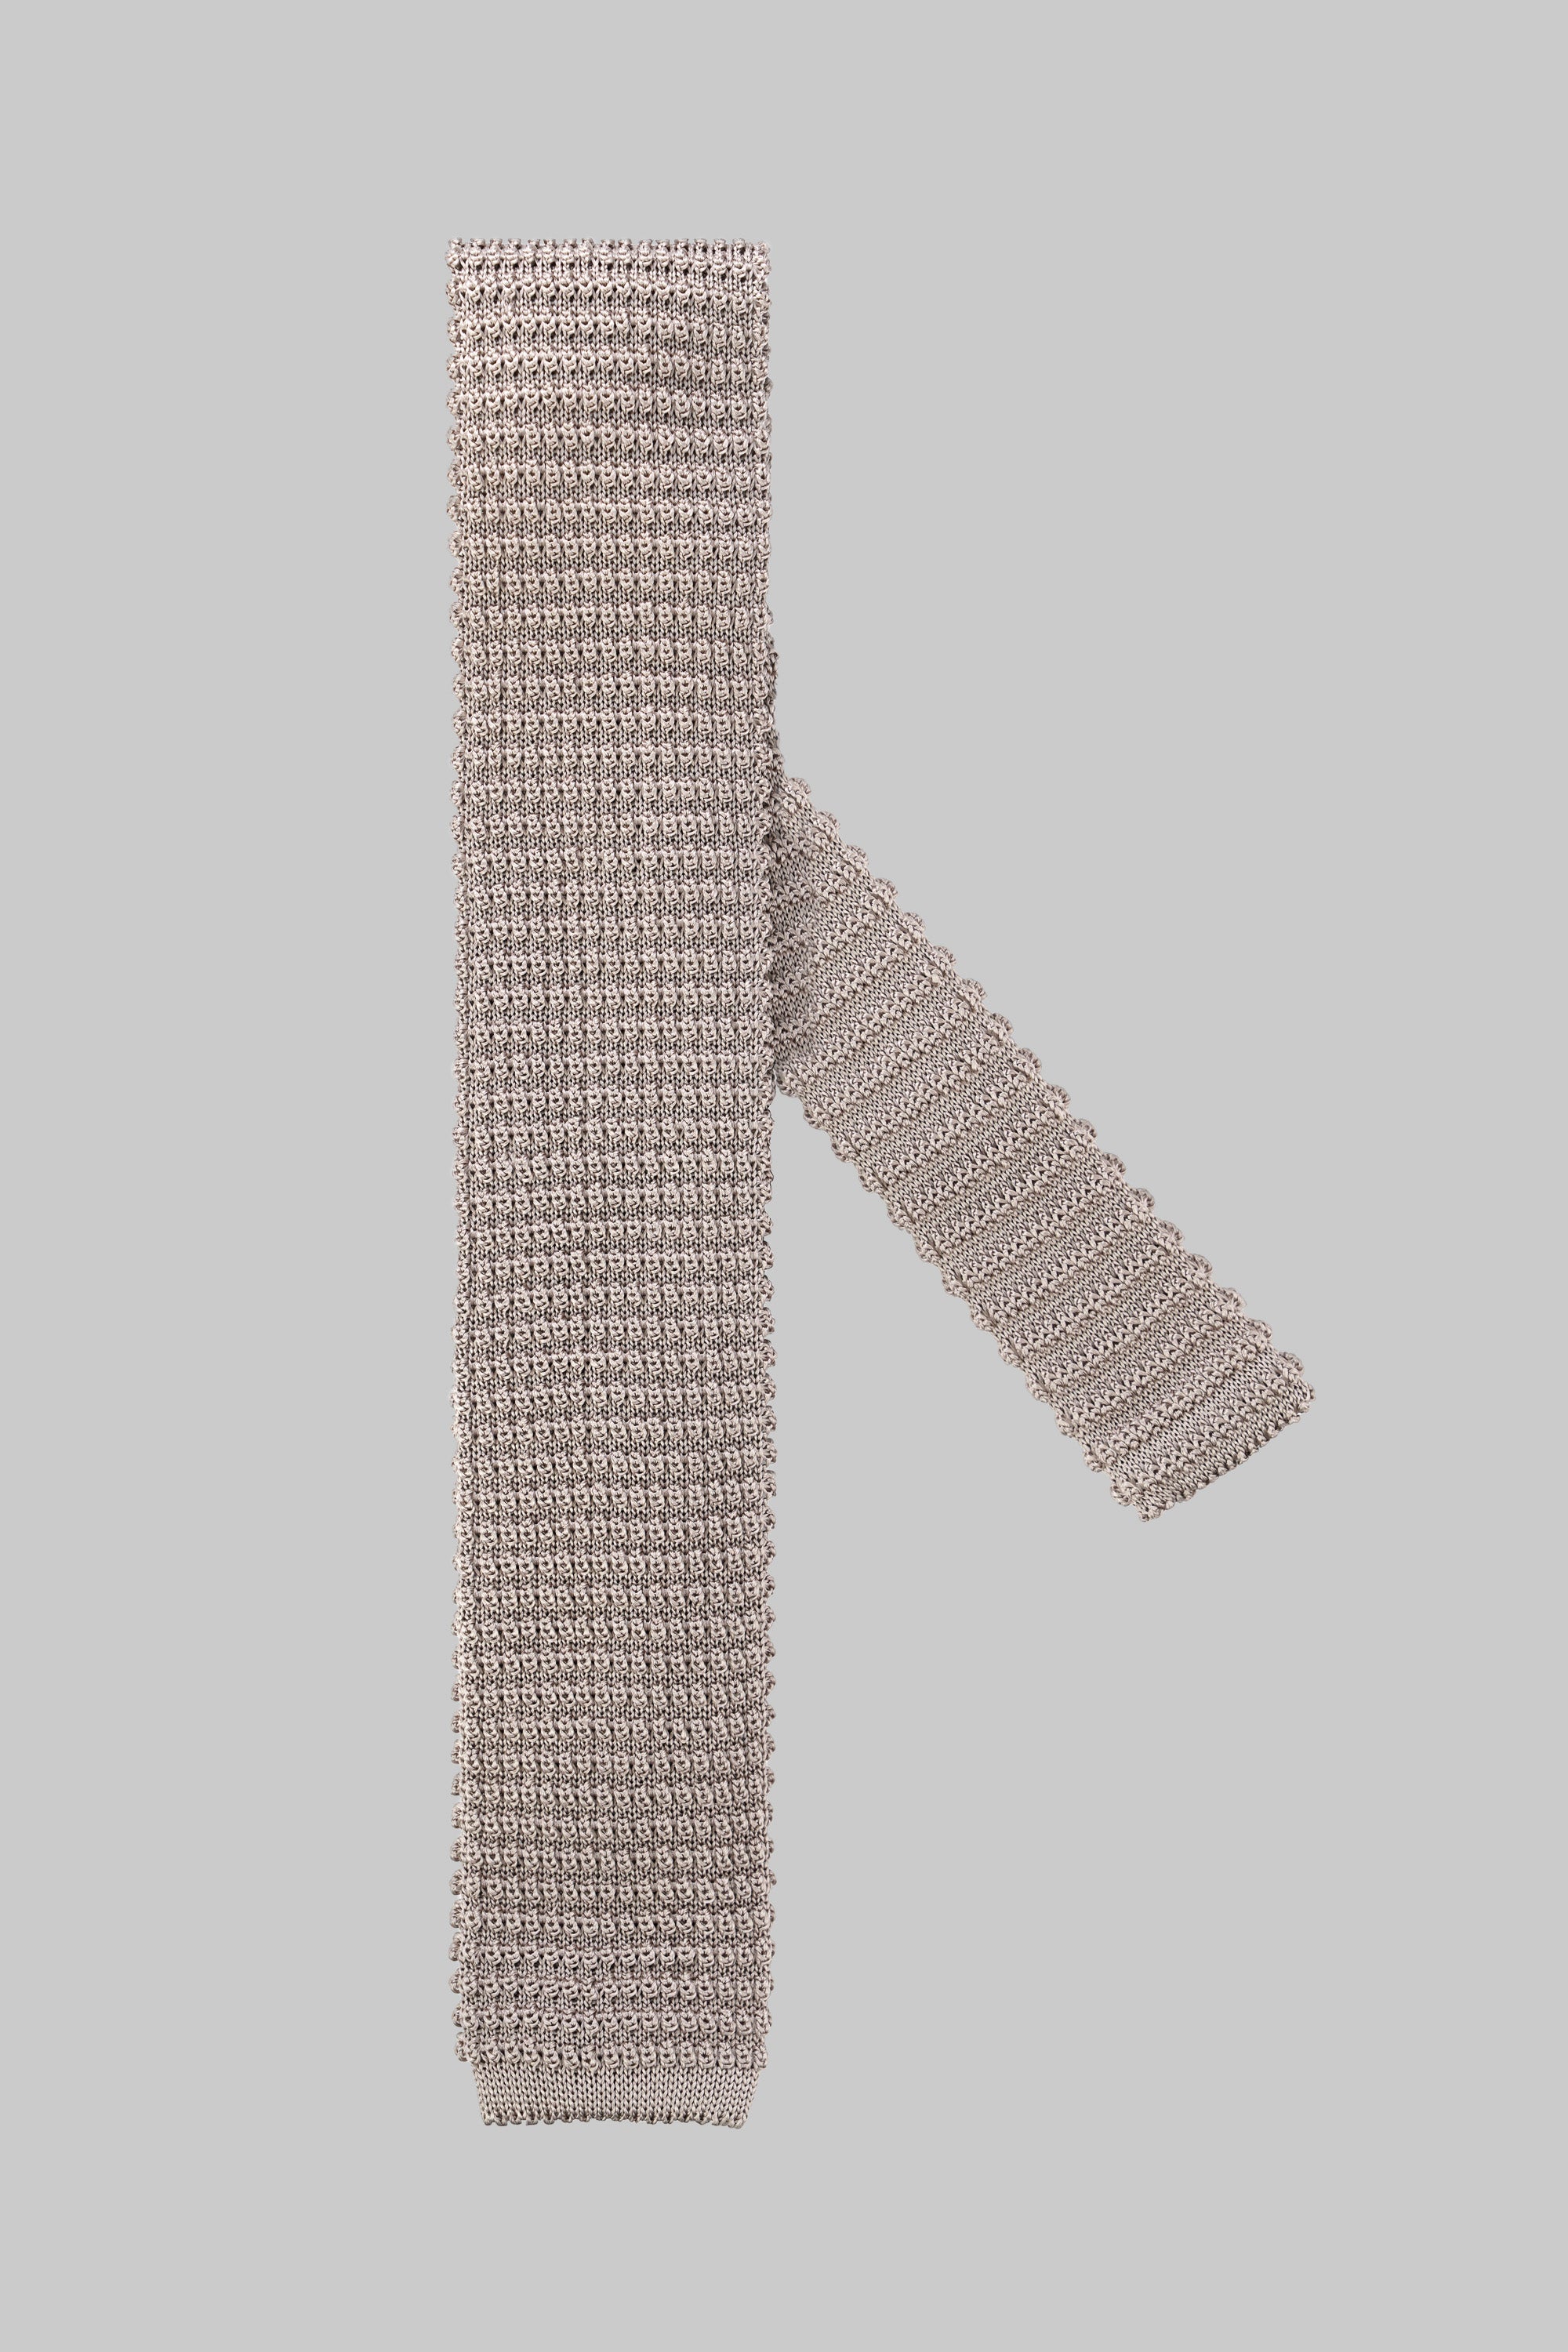 Alt view Hudson Silk Knitted Tie in Oatmeal